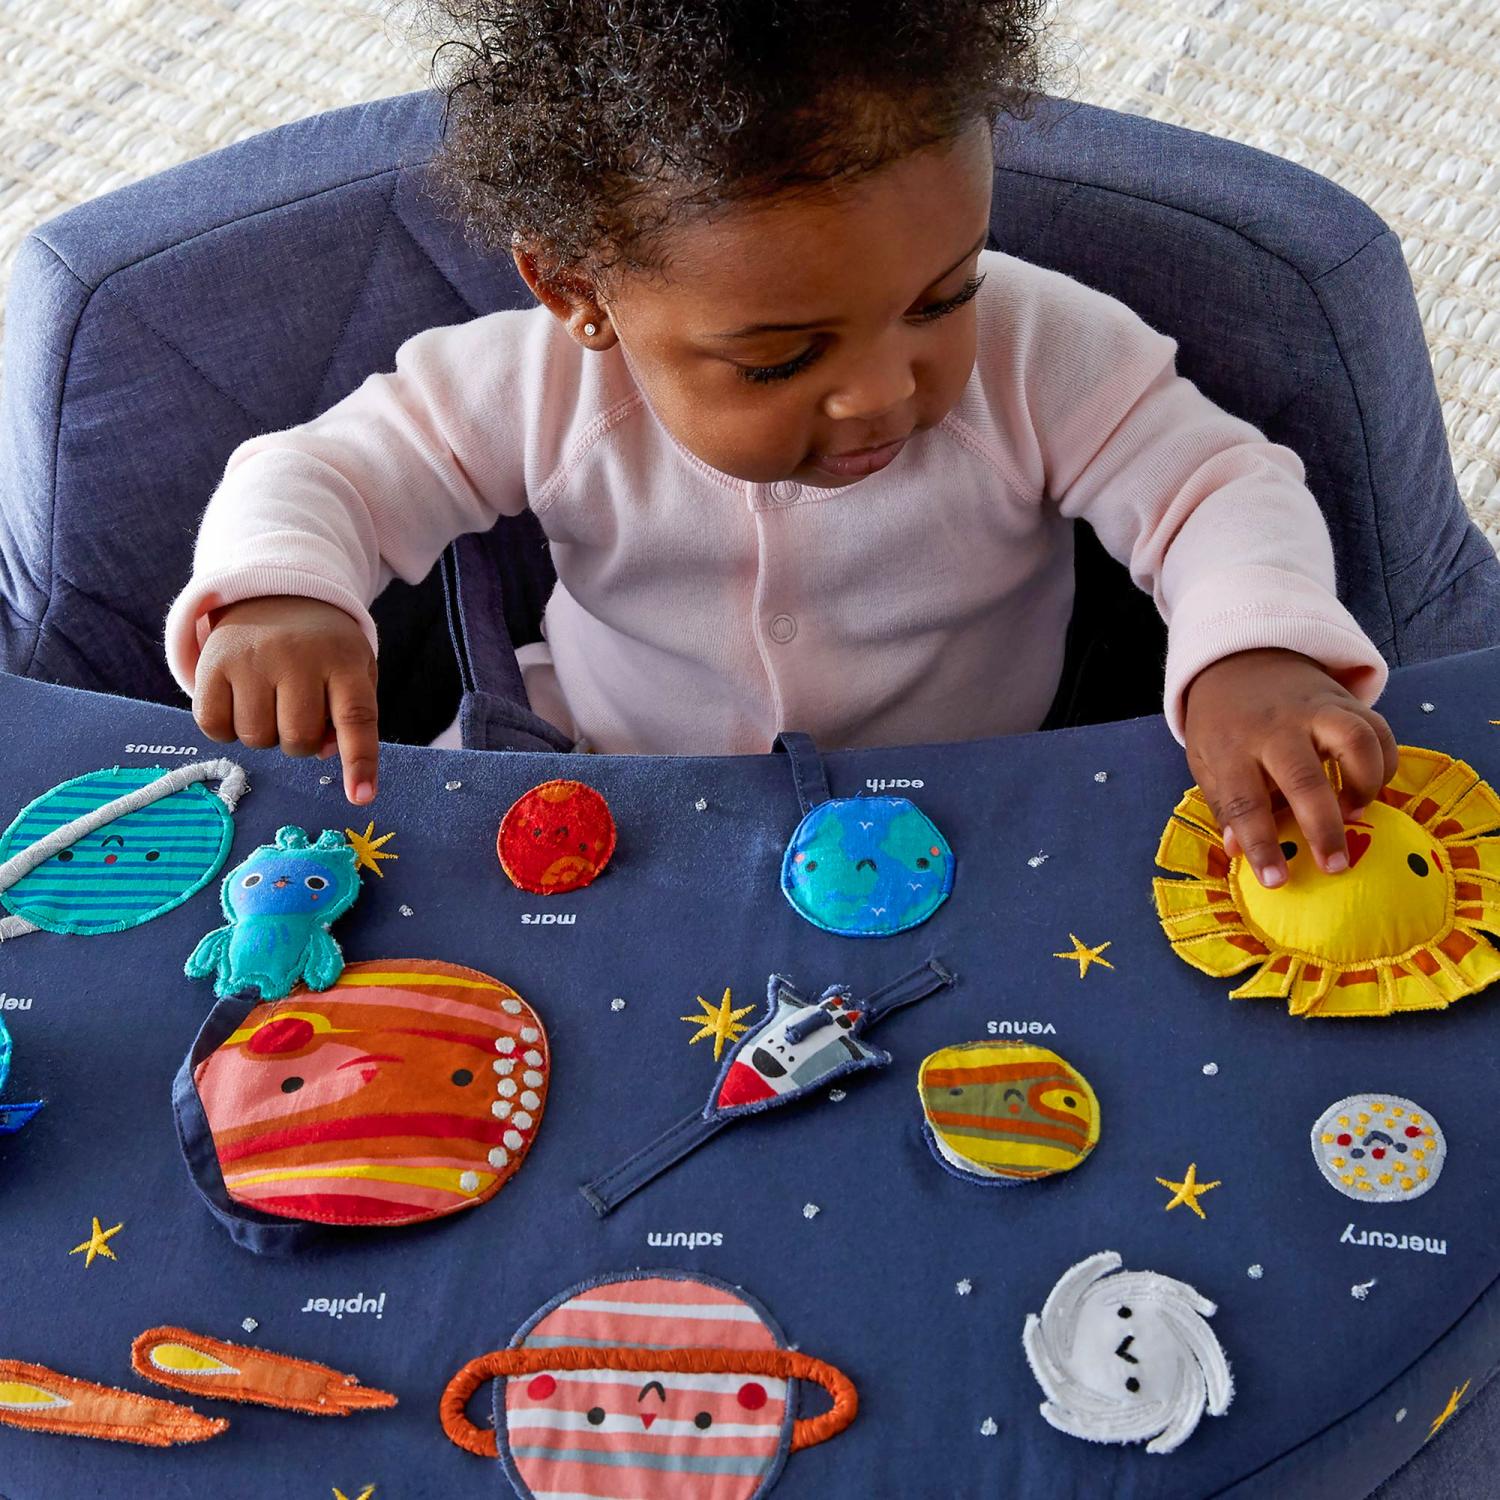 Cute Baby Activity Chair Helps Them Learn About Space And The Solar System - Deep Space Baby Activity Chair